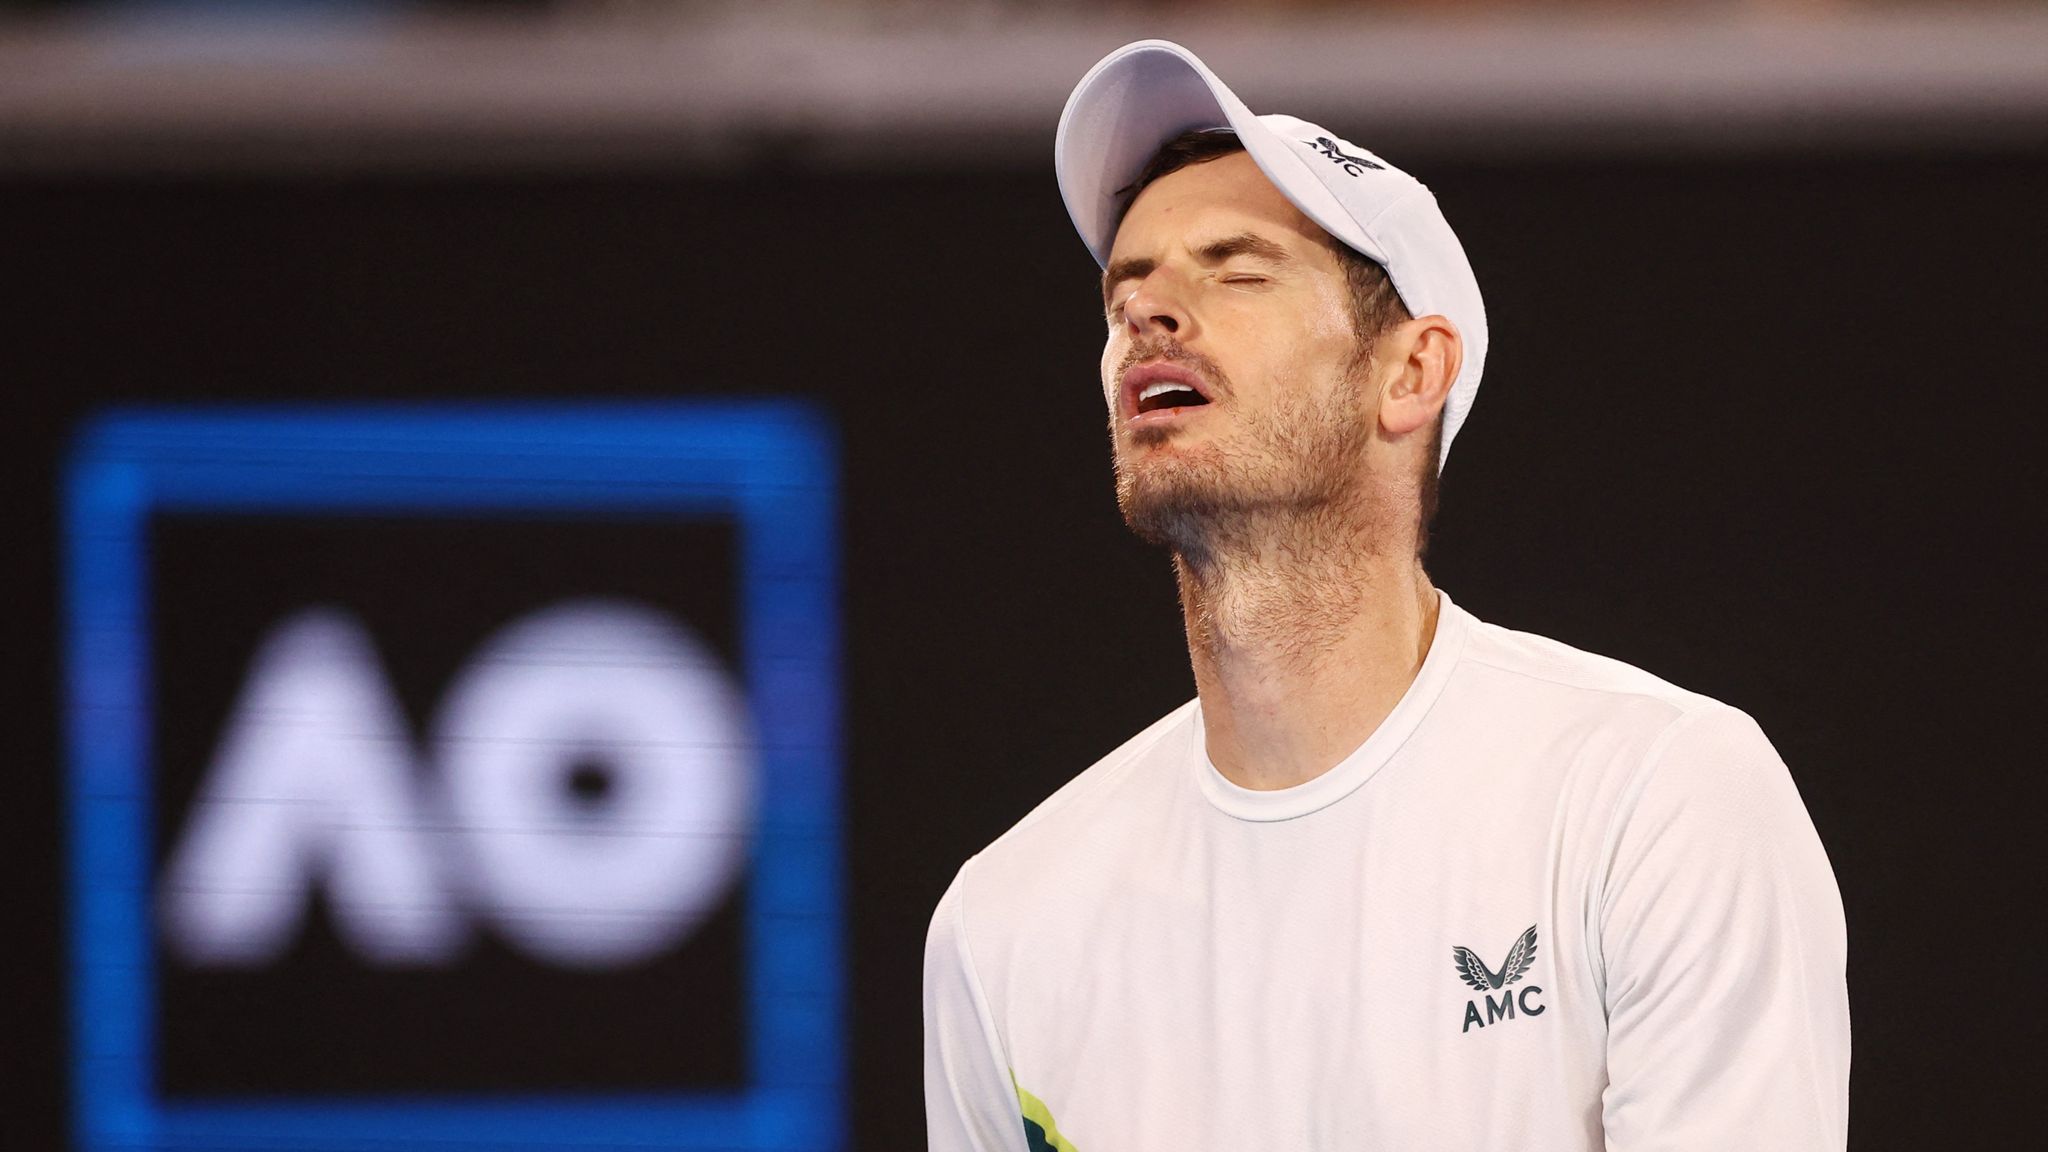 Andy Murray knocked out of Australian Open in third round after losing to Spains Roberto Bautista Agut UK News Sky News